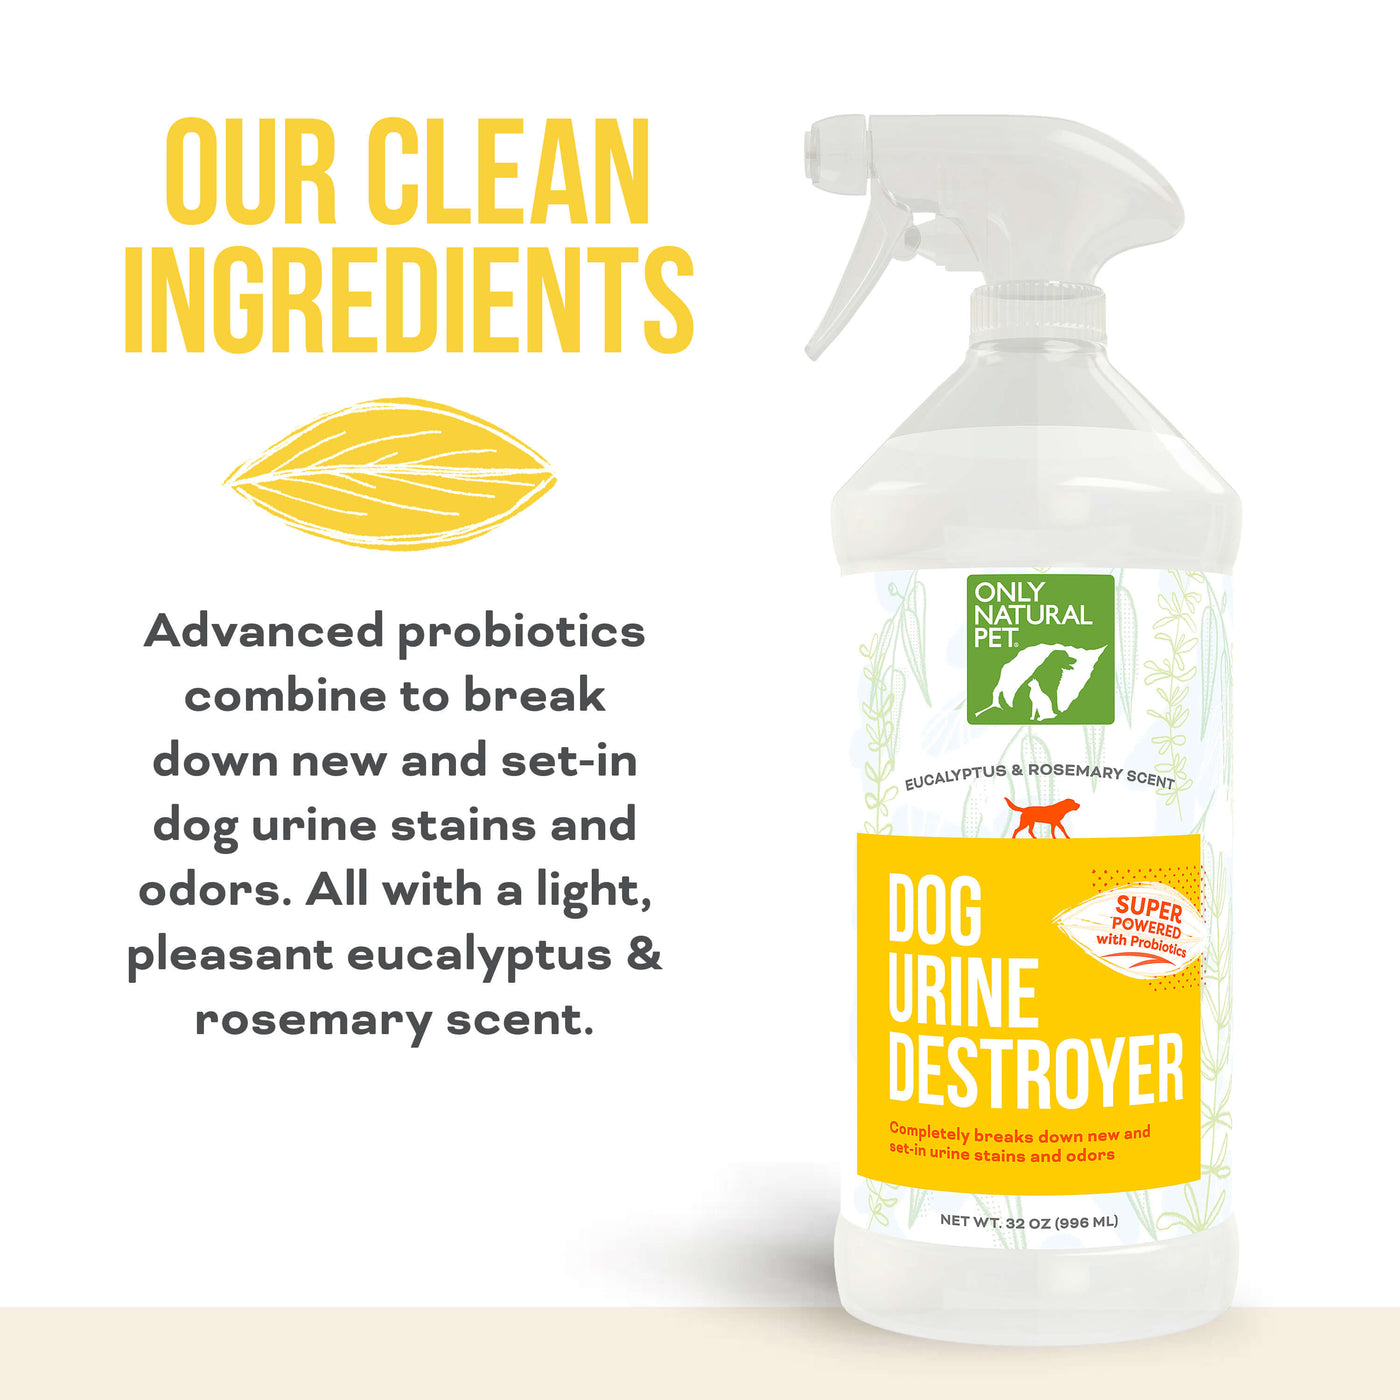 8 DIY Homemade Natural and Pet Safe Cleaners - Furchild